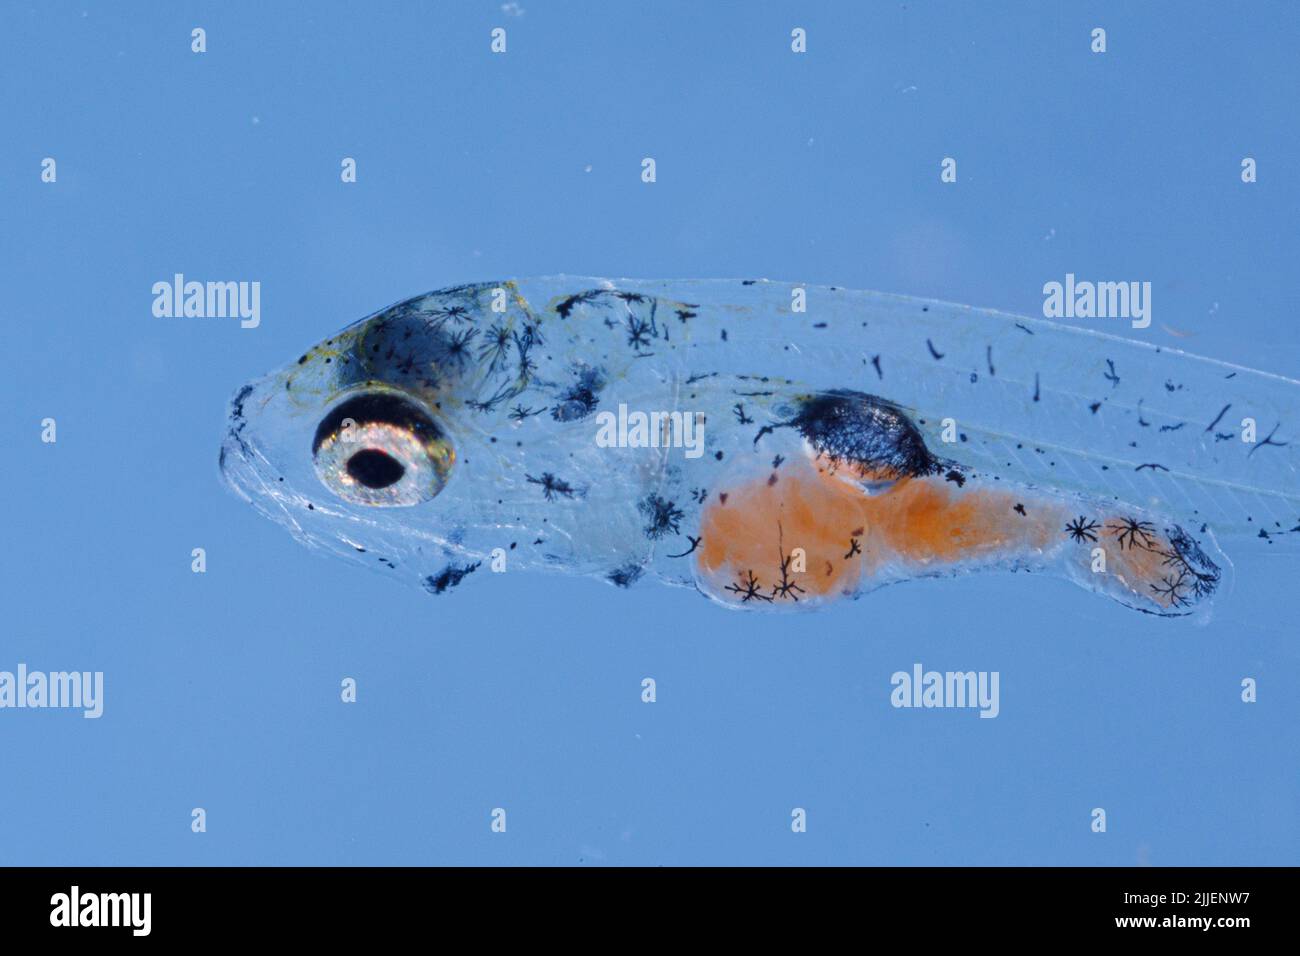 pike-perch, zander (Stizostedion lucioperca, Sander lucioperca), larva three weeks after egg deposition at water temperature of 21 degree Celsius , Ge Stock Photo